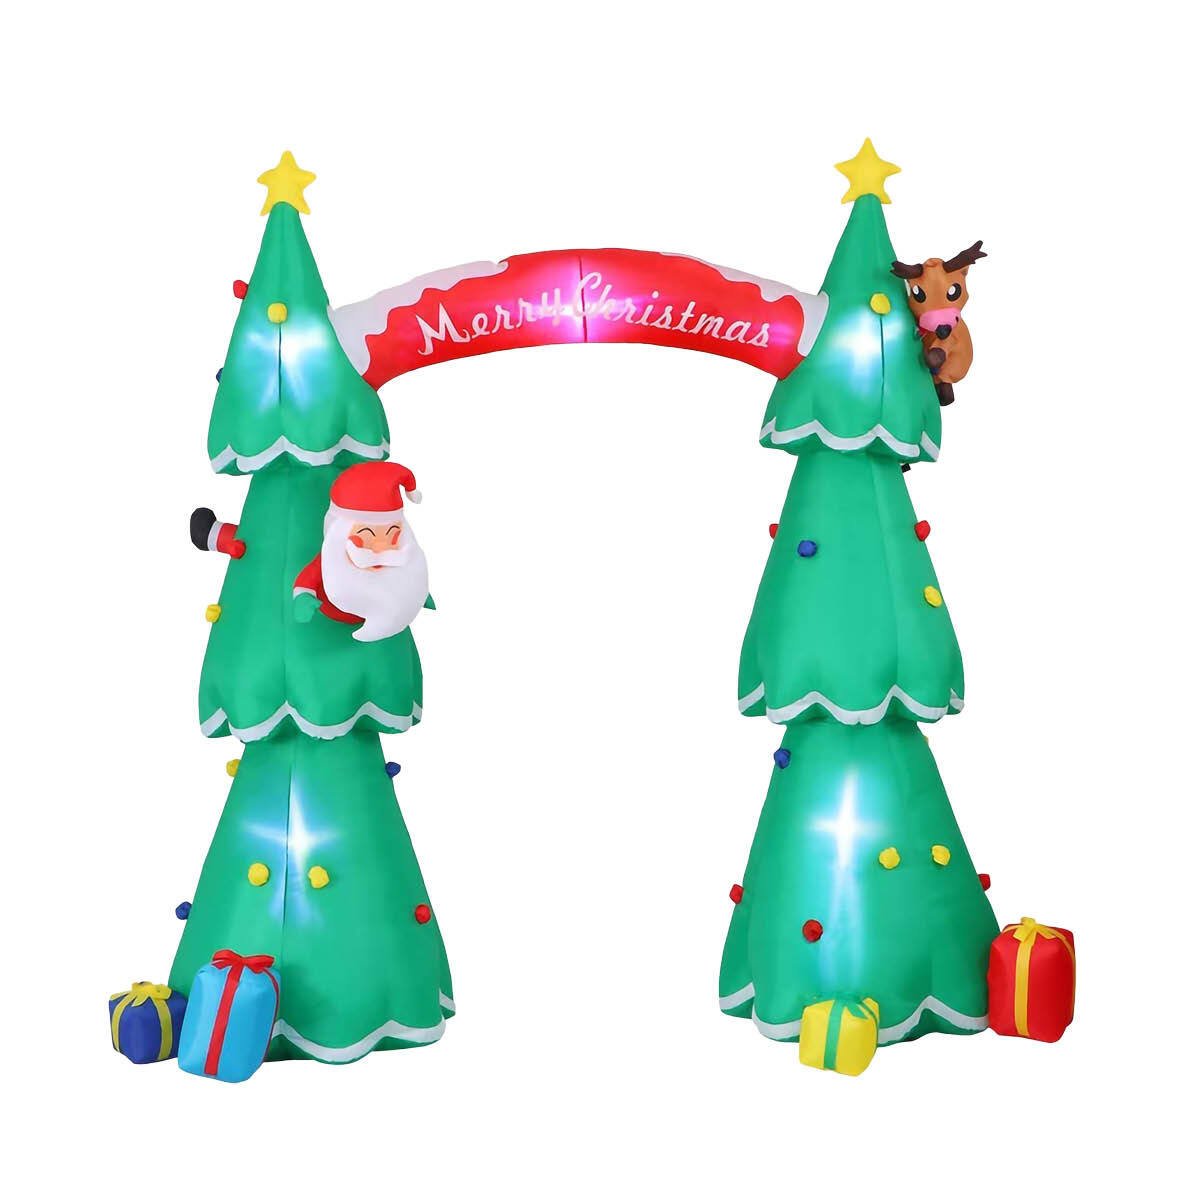 Christmas By Sas 3m x 2.4m Christmas Tree Arch Self Inflating LED Lights - Little Kids Business